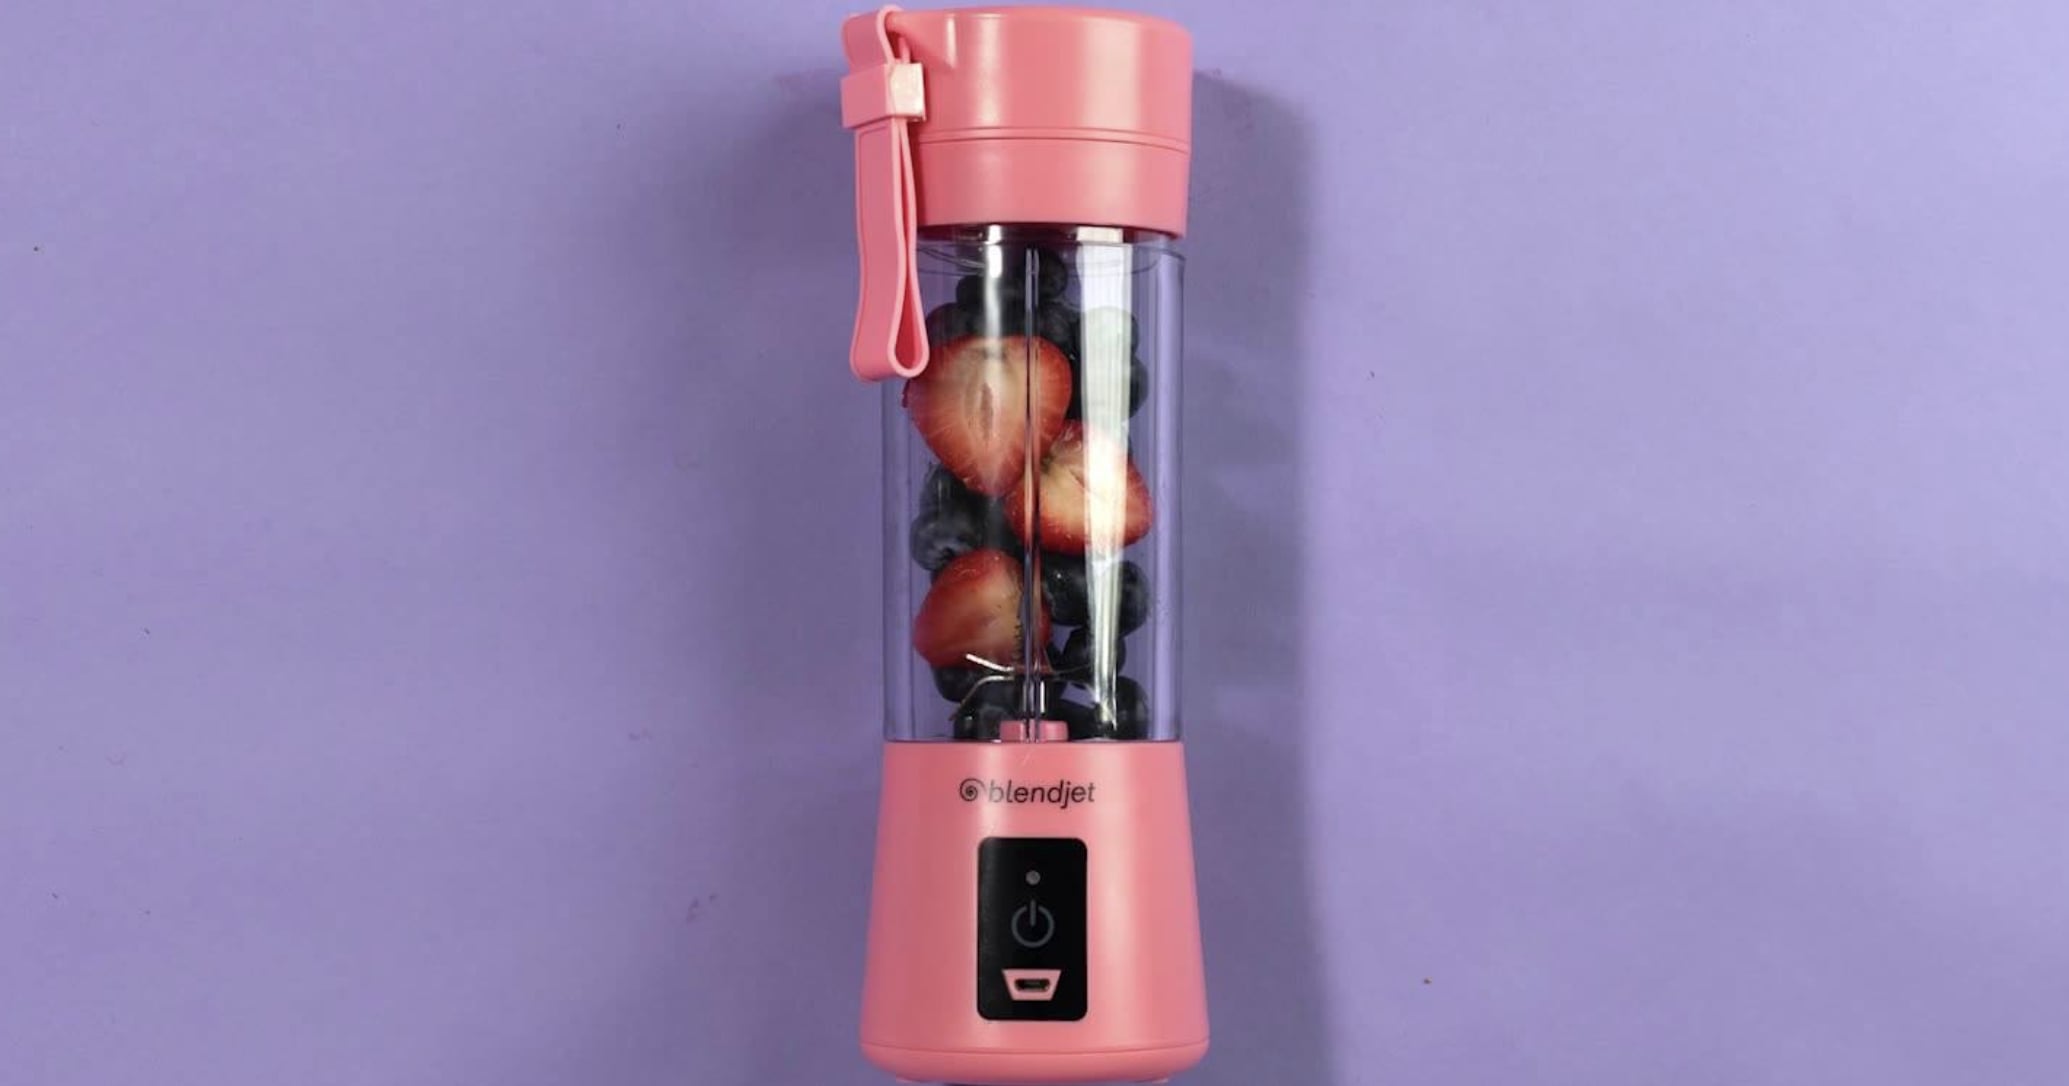 BlendJet, the Internet's Favorite Blender, Has a New Attachment To